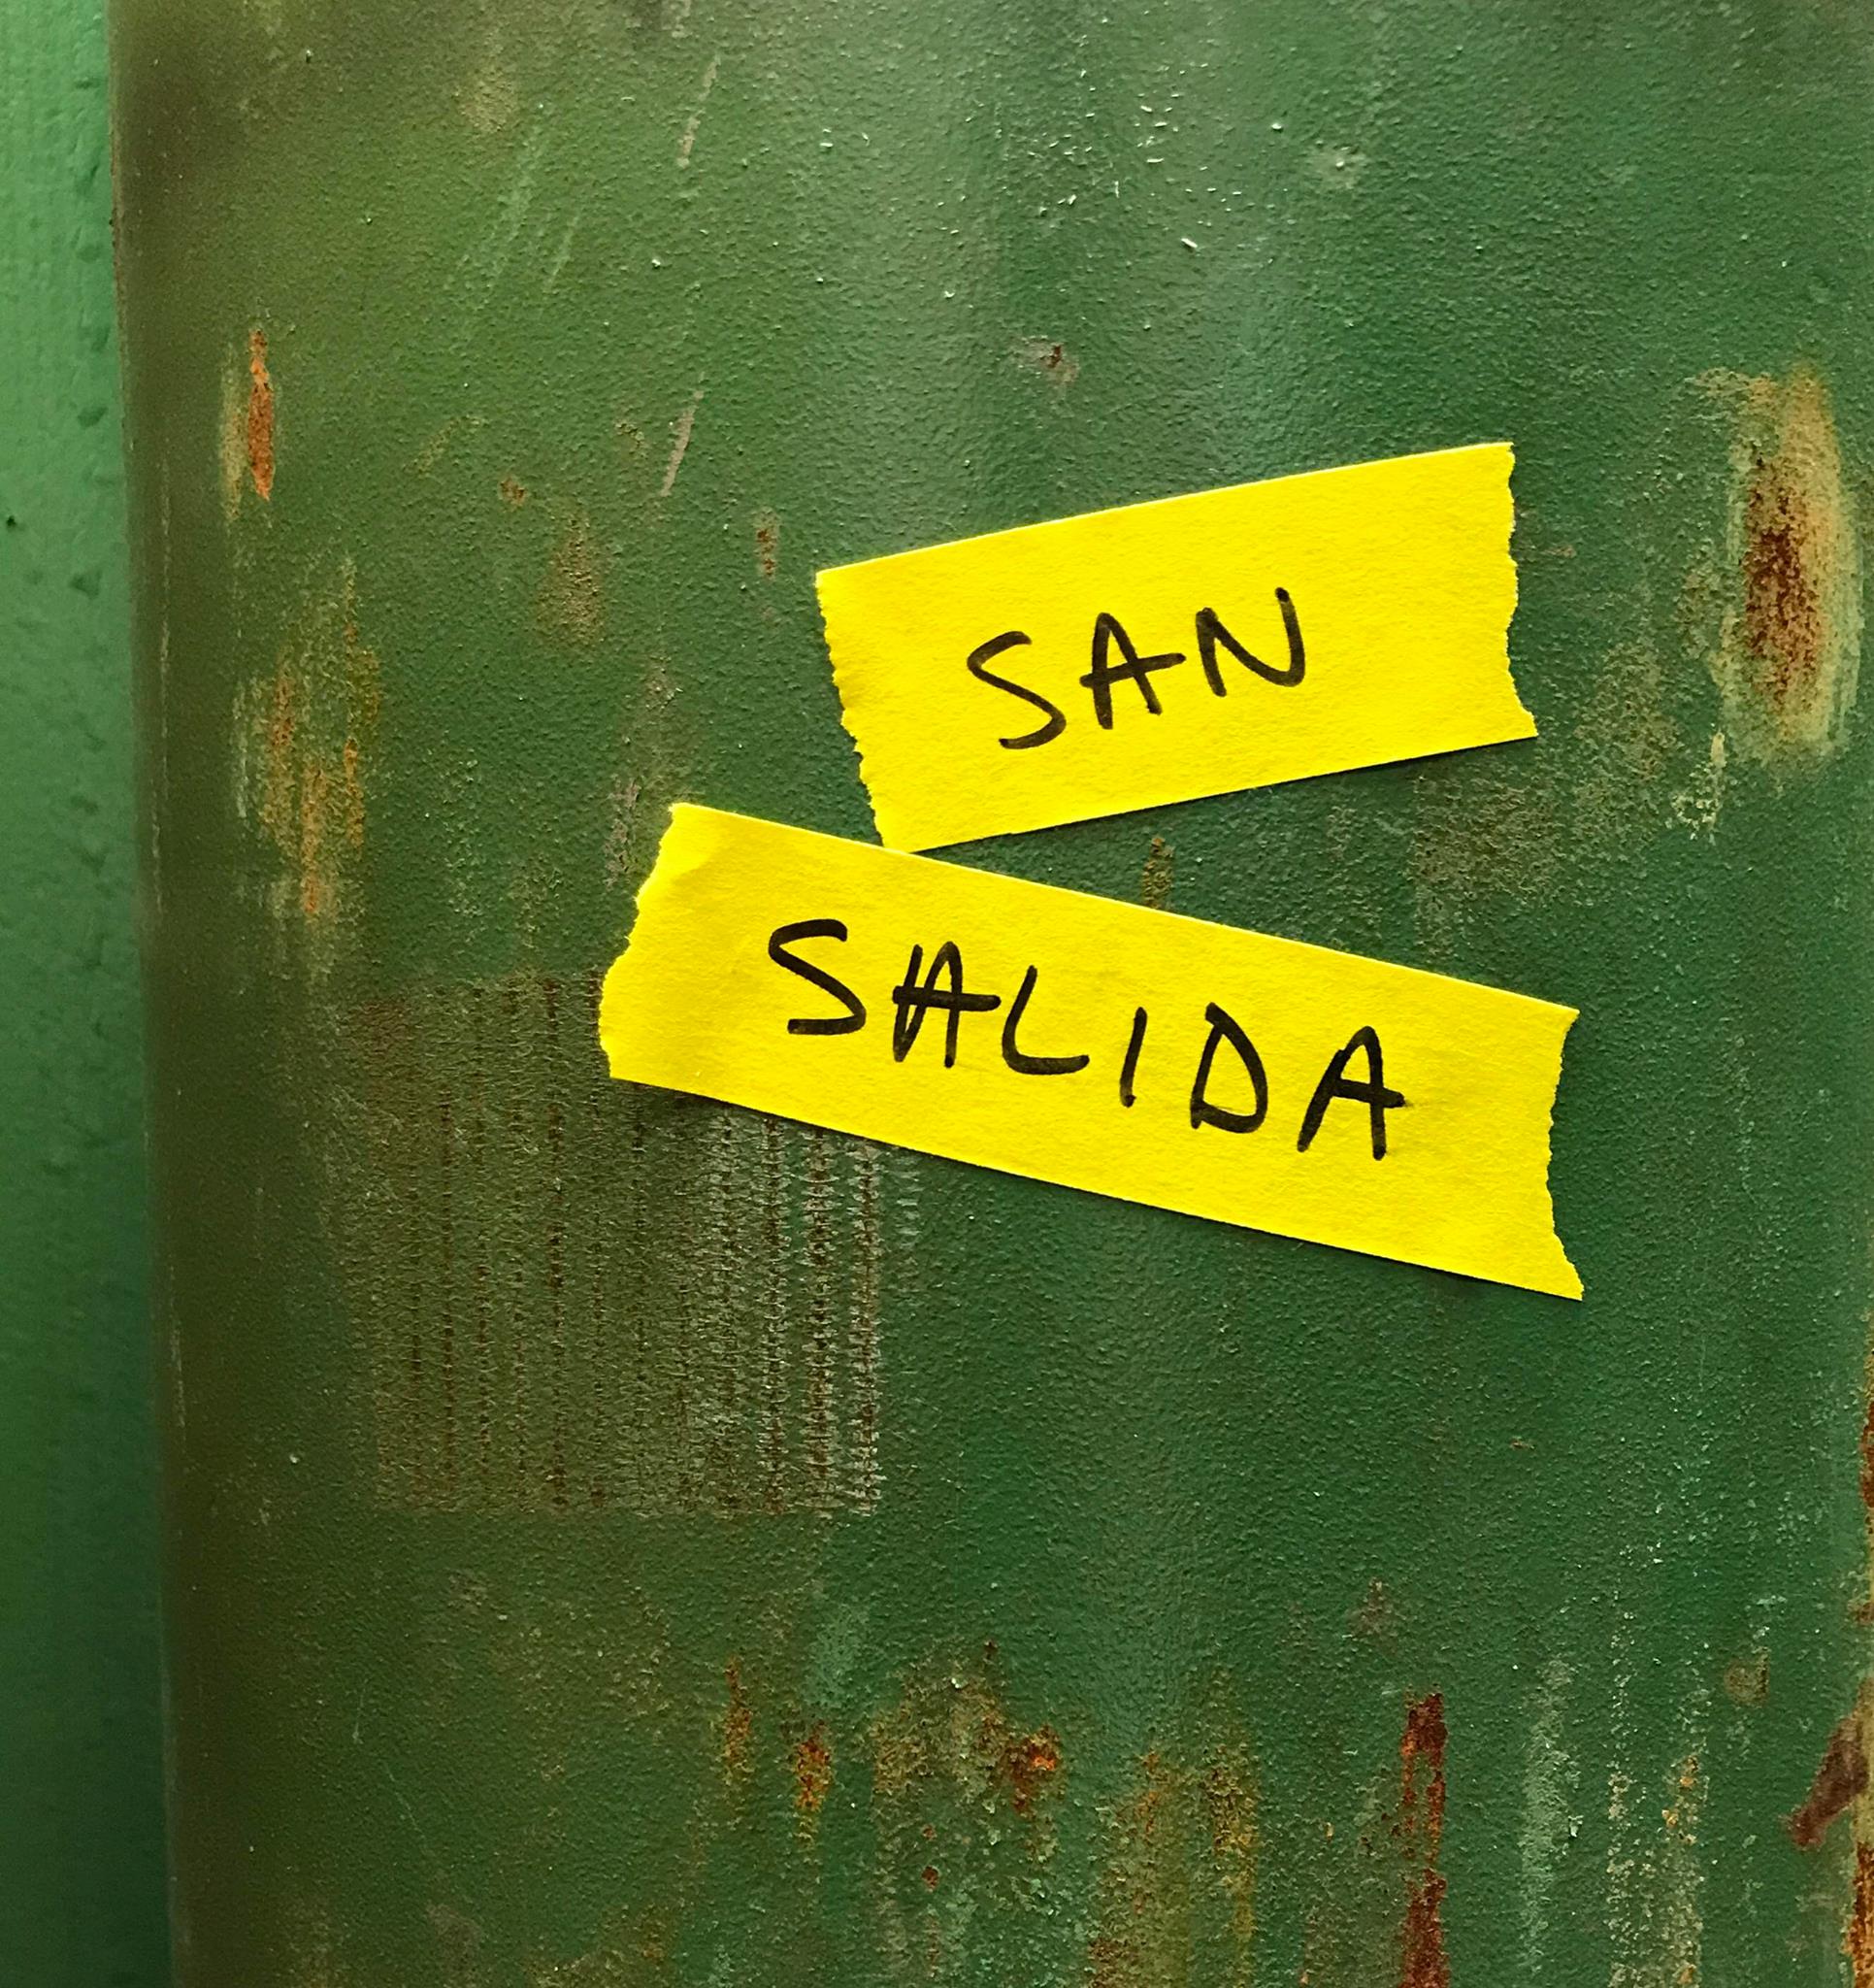 Five Questions with San Salida